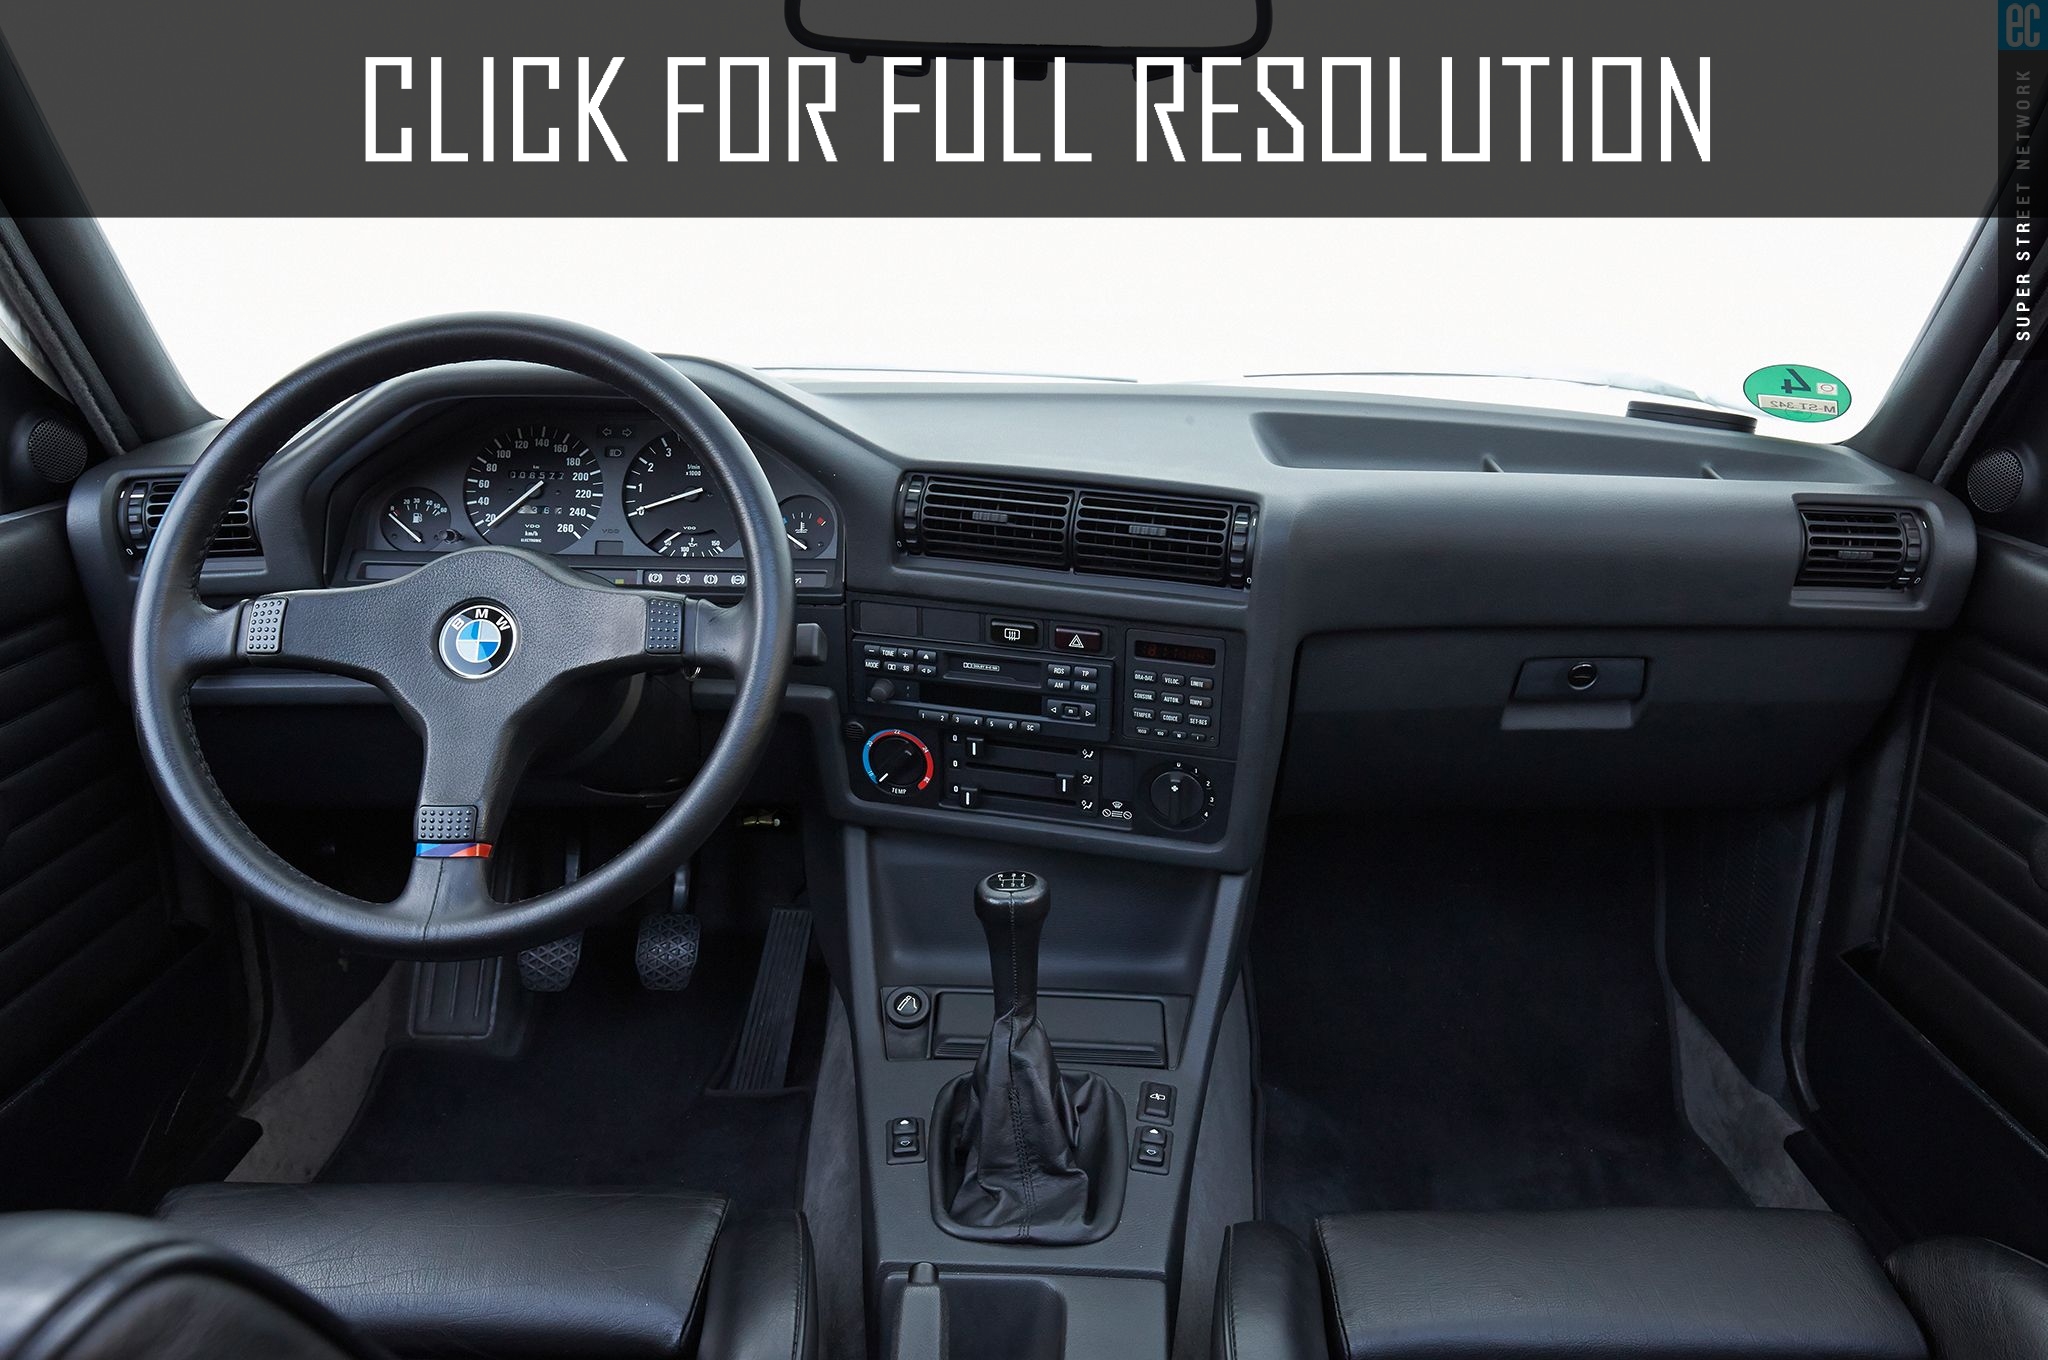 1988 Bmw 325i Best Image Gallery 13 21 Share And Download